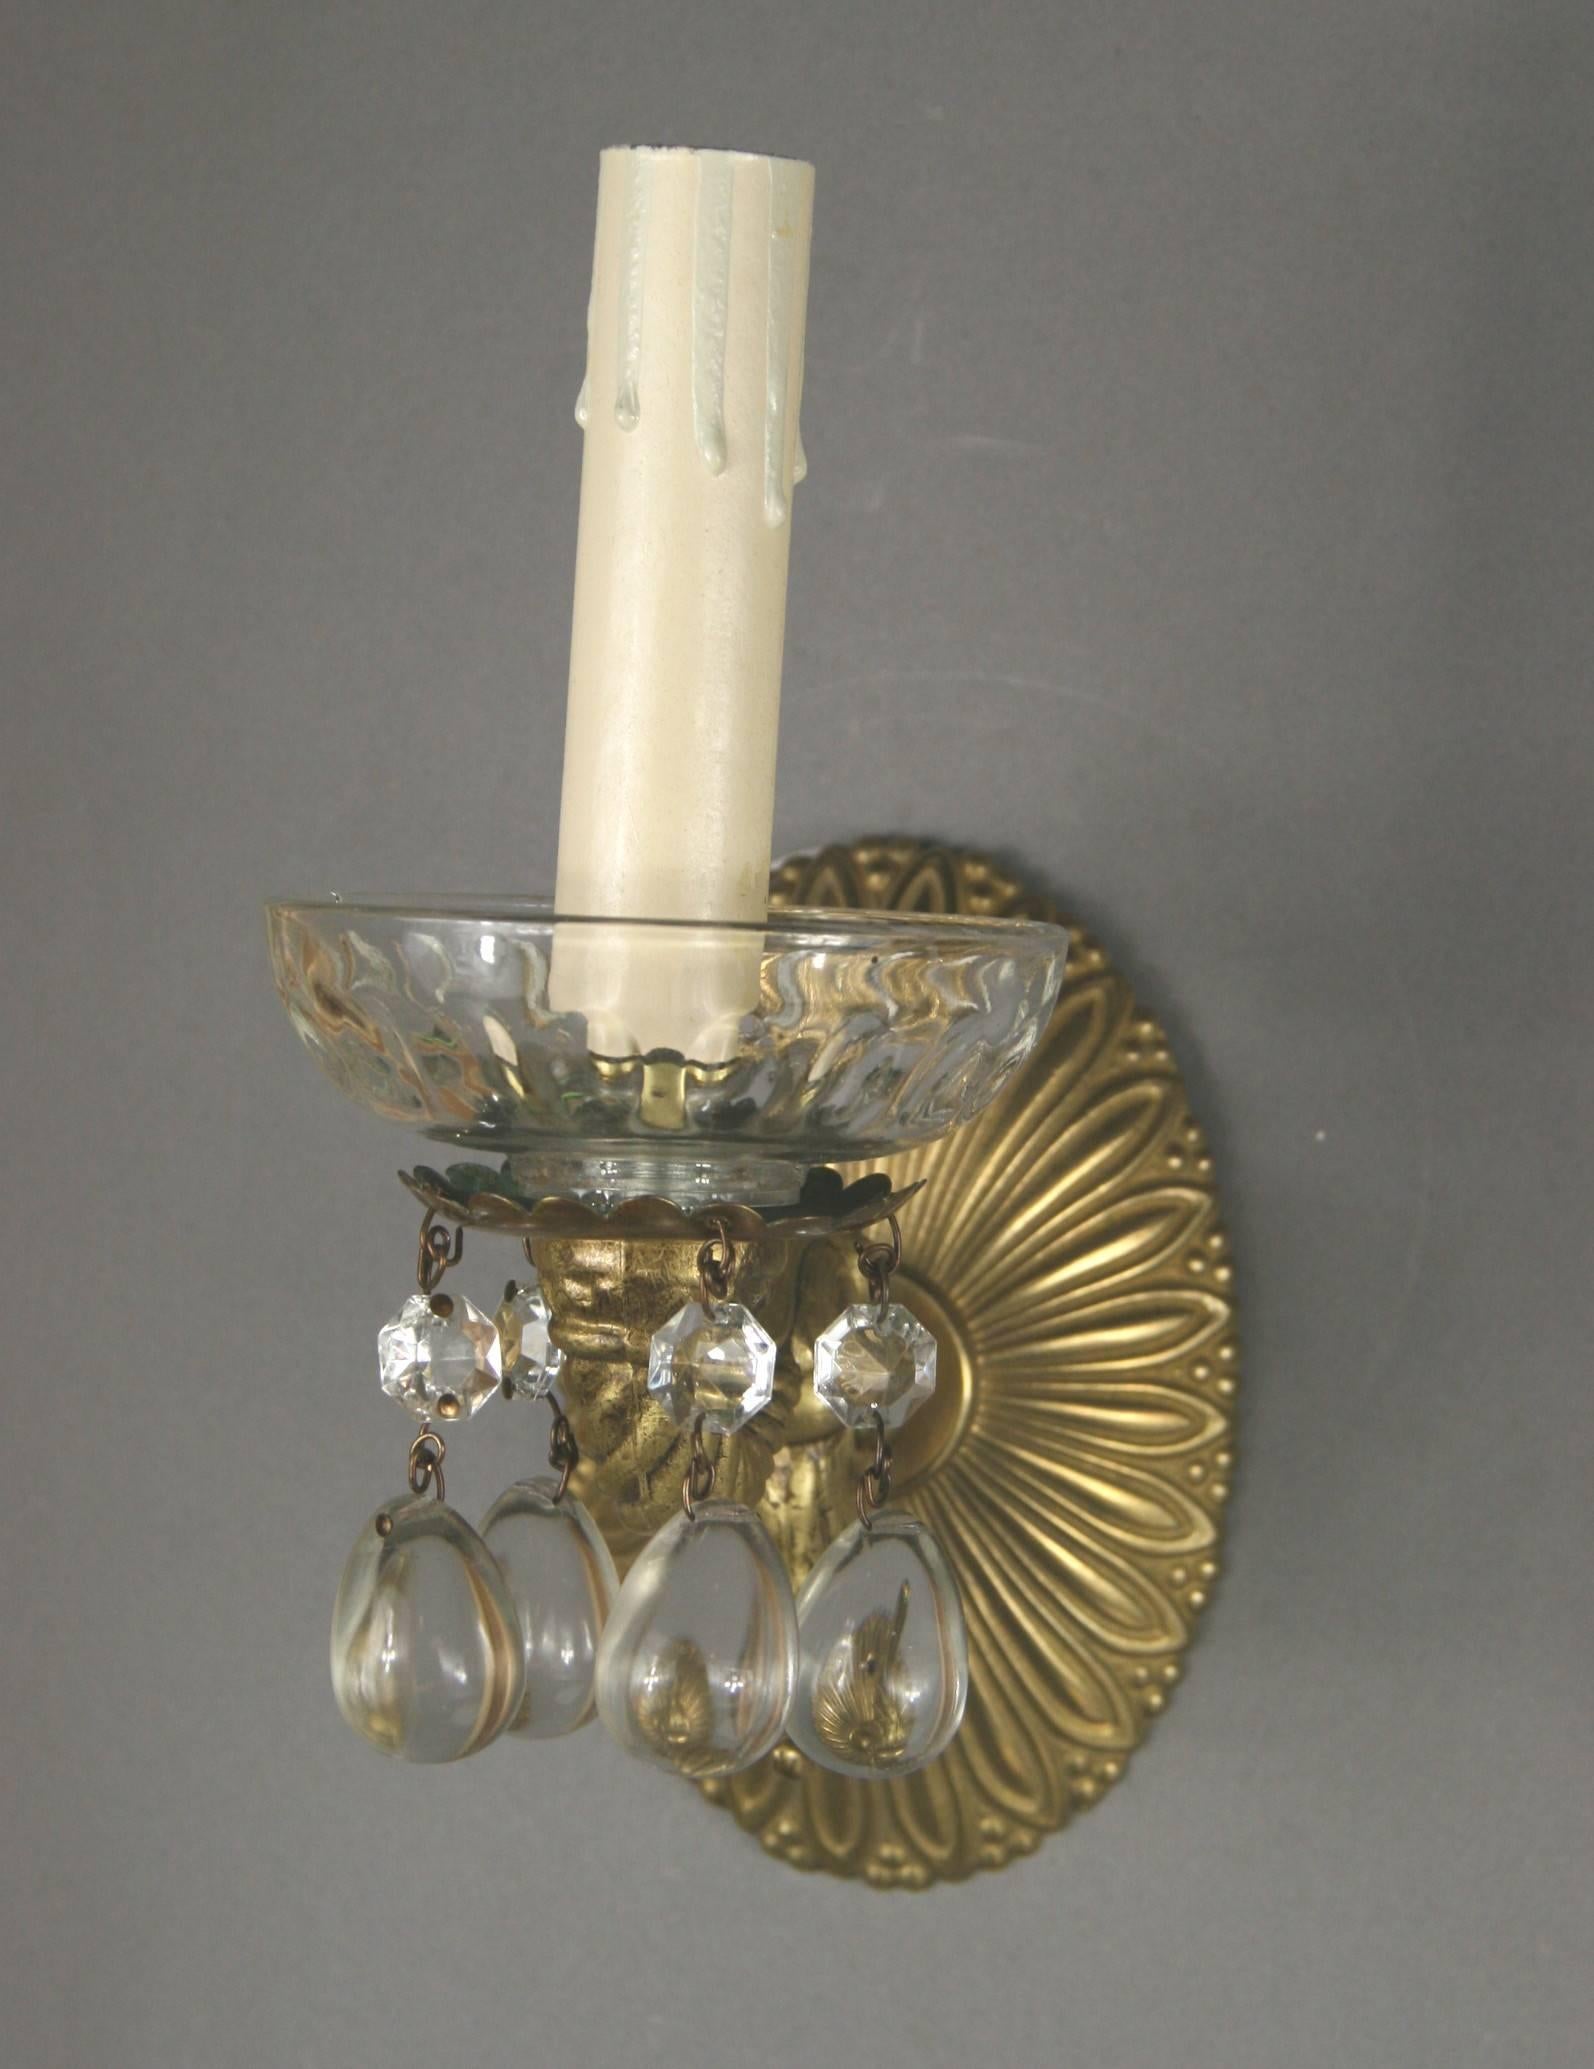 1-4066 pair of ornate brass single arm sconce ending with a glass bobeches, dressed with crystal drops.
Newly rewired. Takes 60 W candelabra base bulb.
Requires 2 